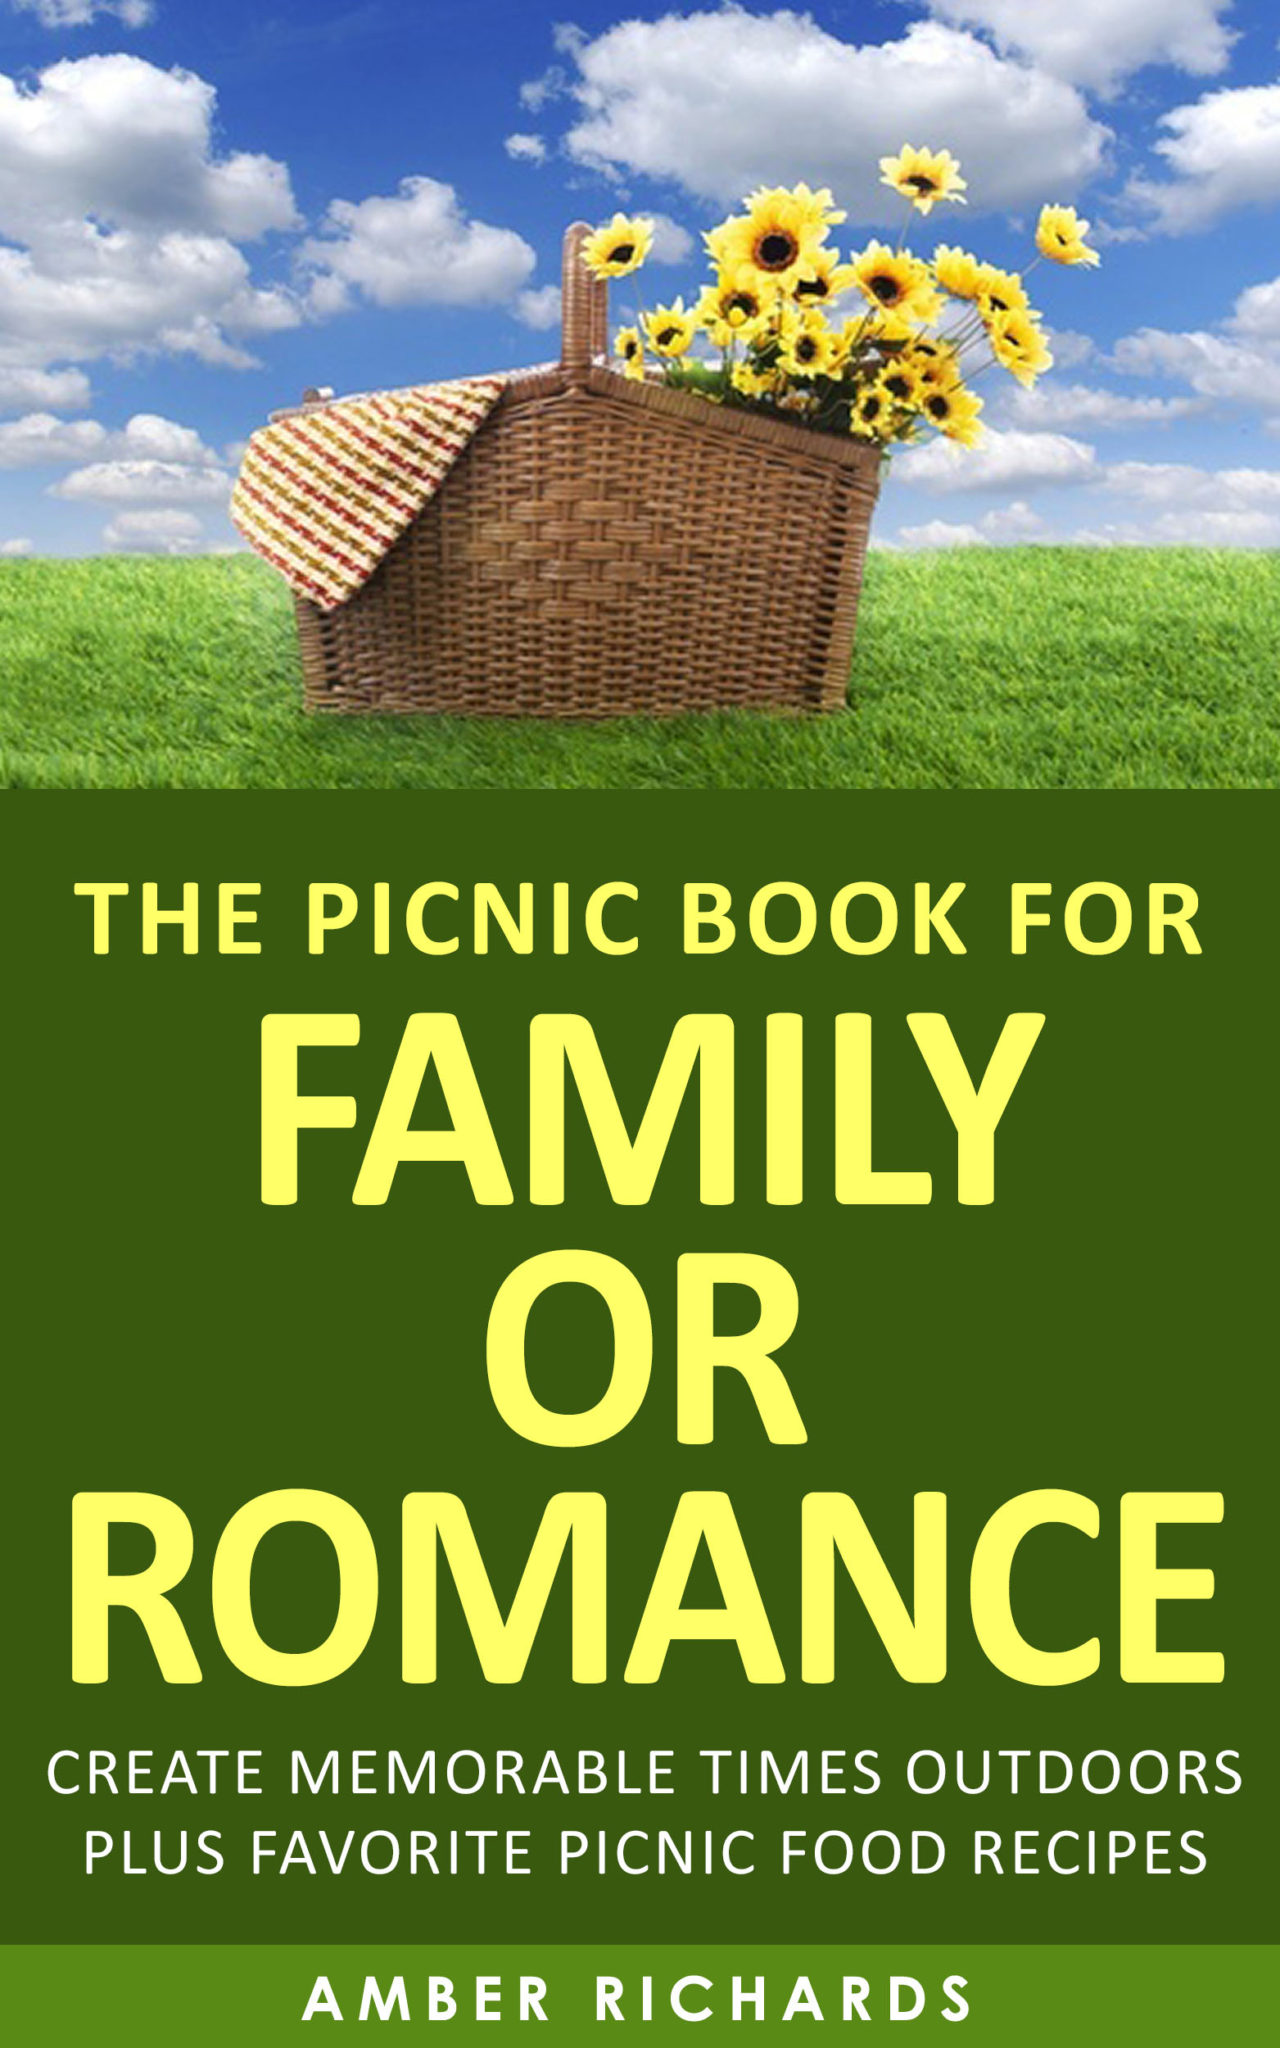 FREE: The Picnic Book for Family or Romance: Create Memorable Times Outdoors Plus Favorite Picnic Food Recipes by Amber Richards